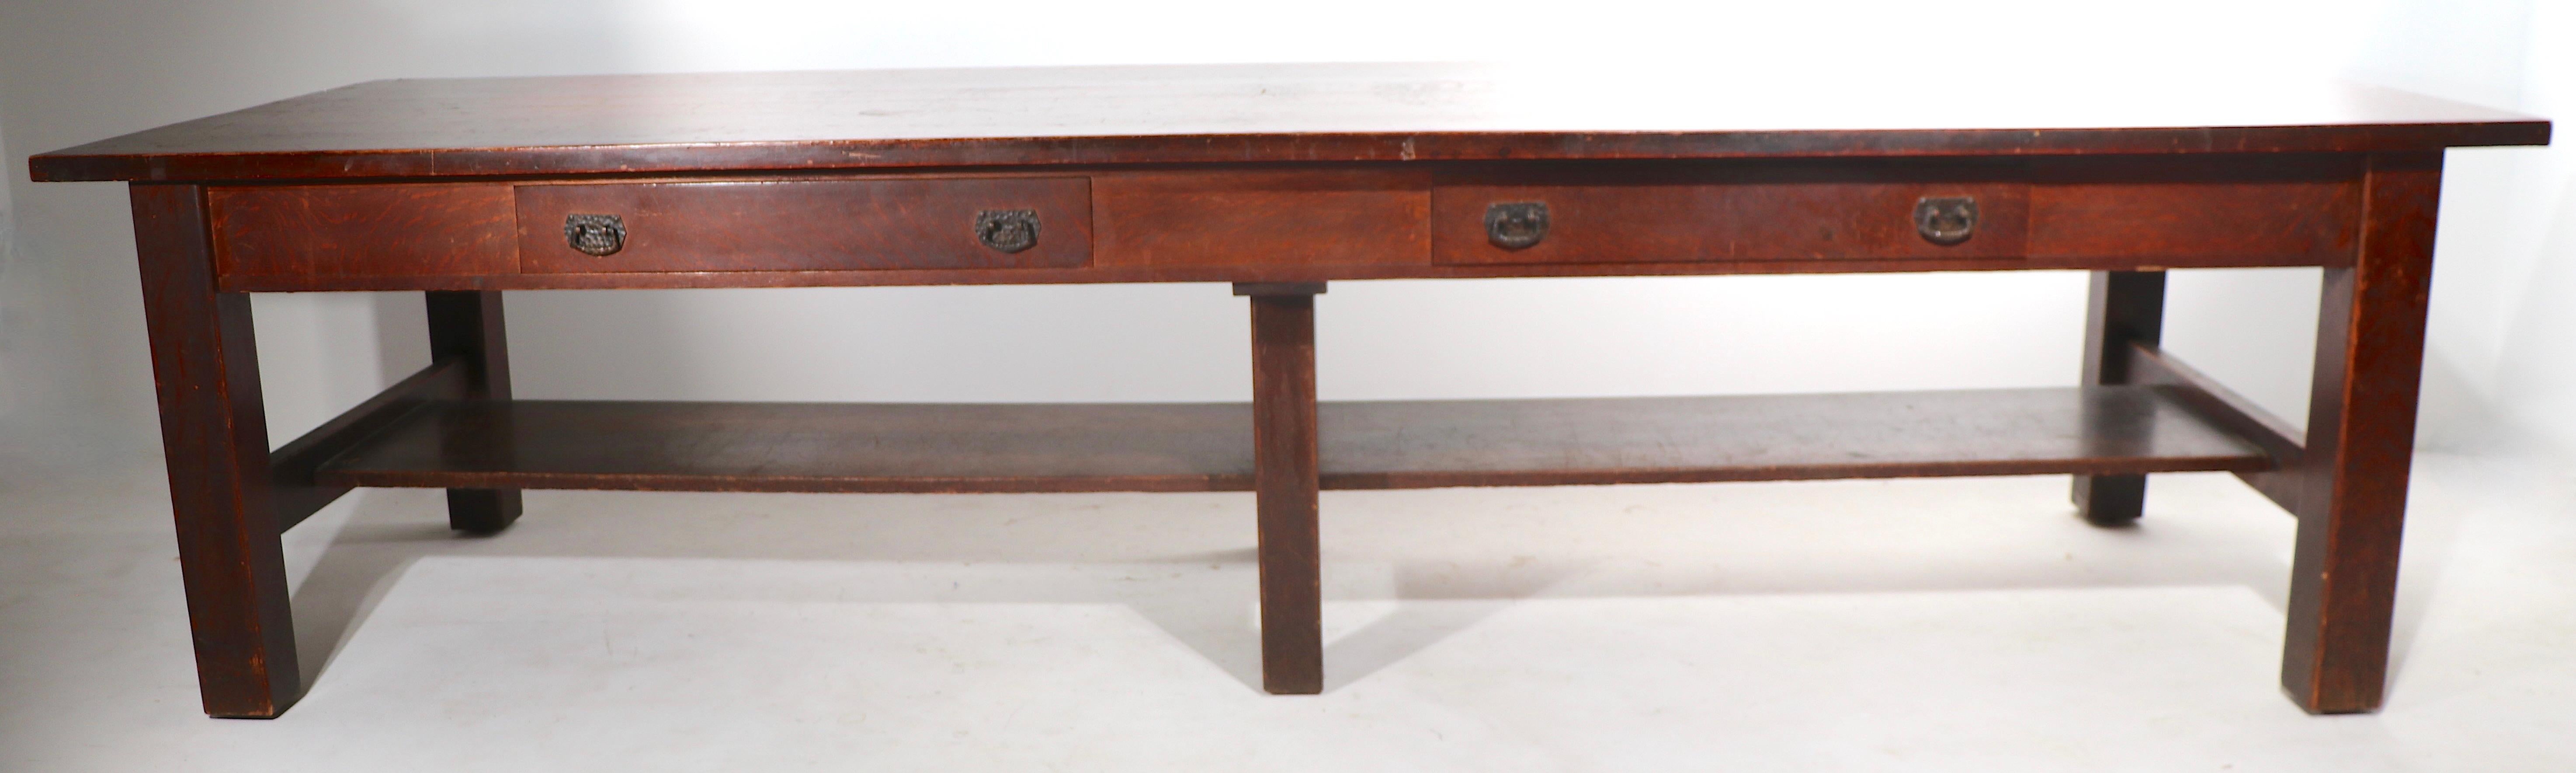 Arts and Crafts Massive Arts & Crafts Mission Oak Conference Dining Table by J. M. Young For Sale